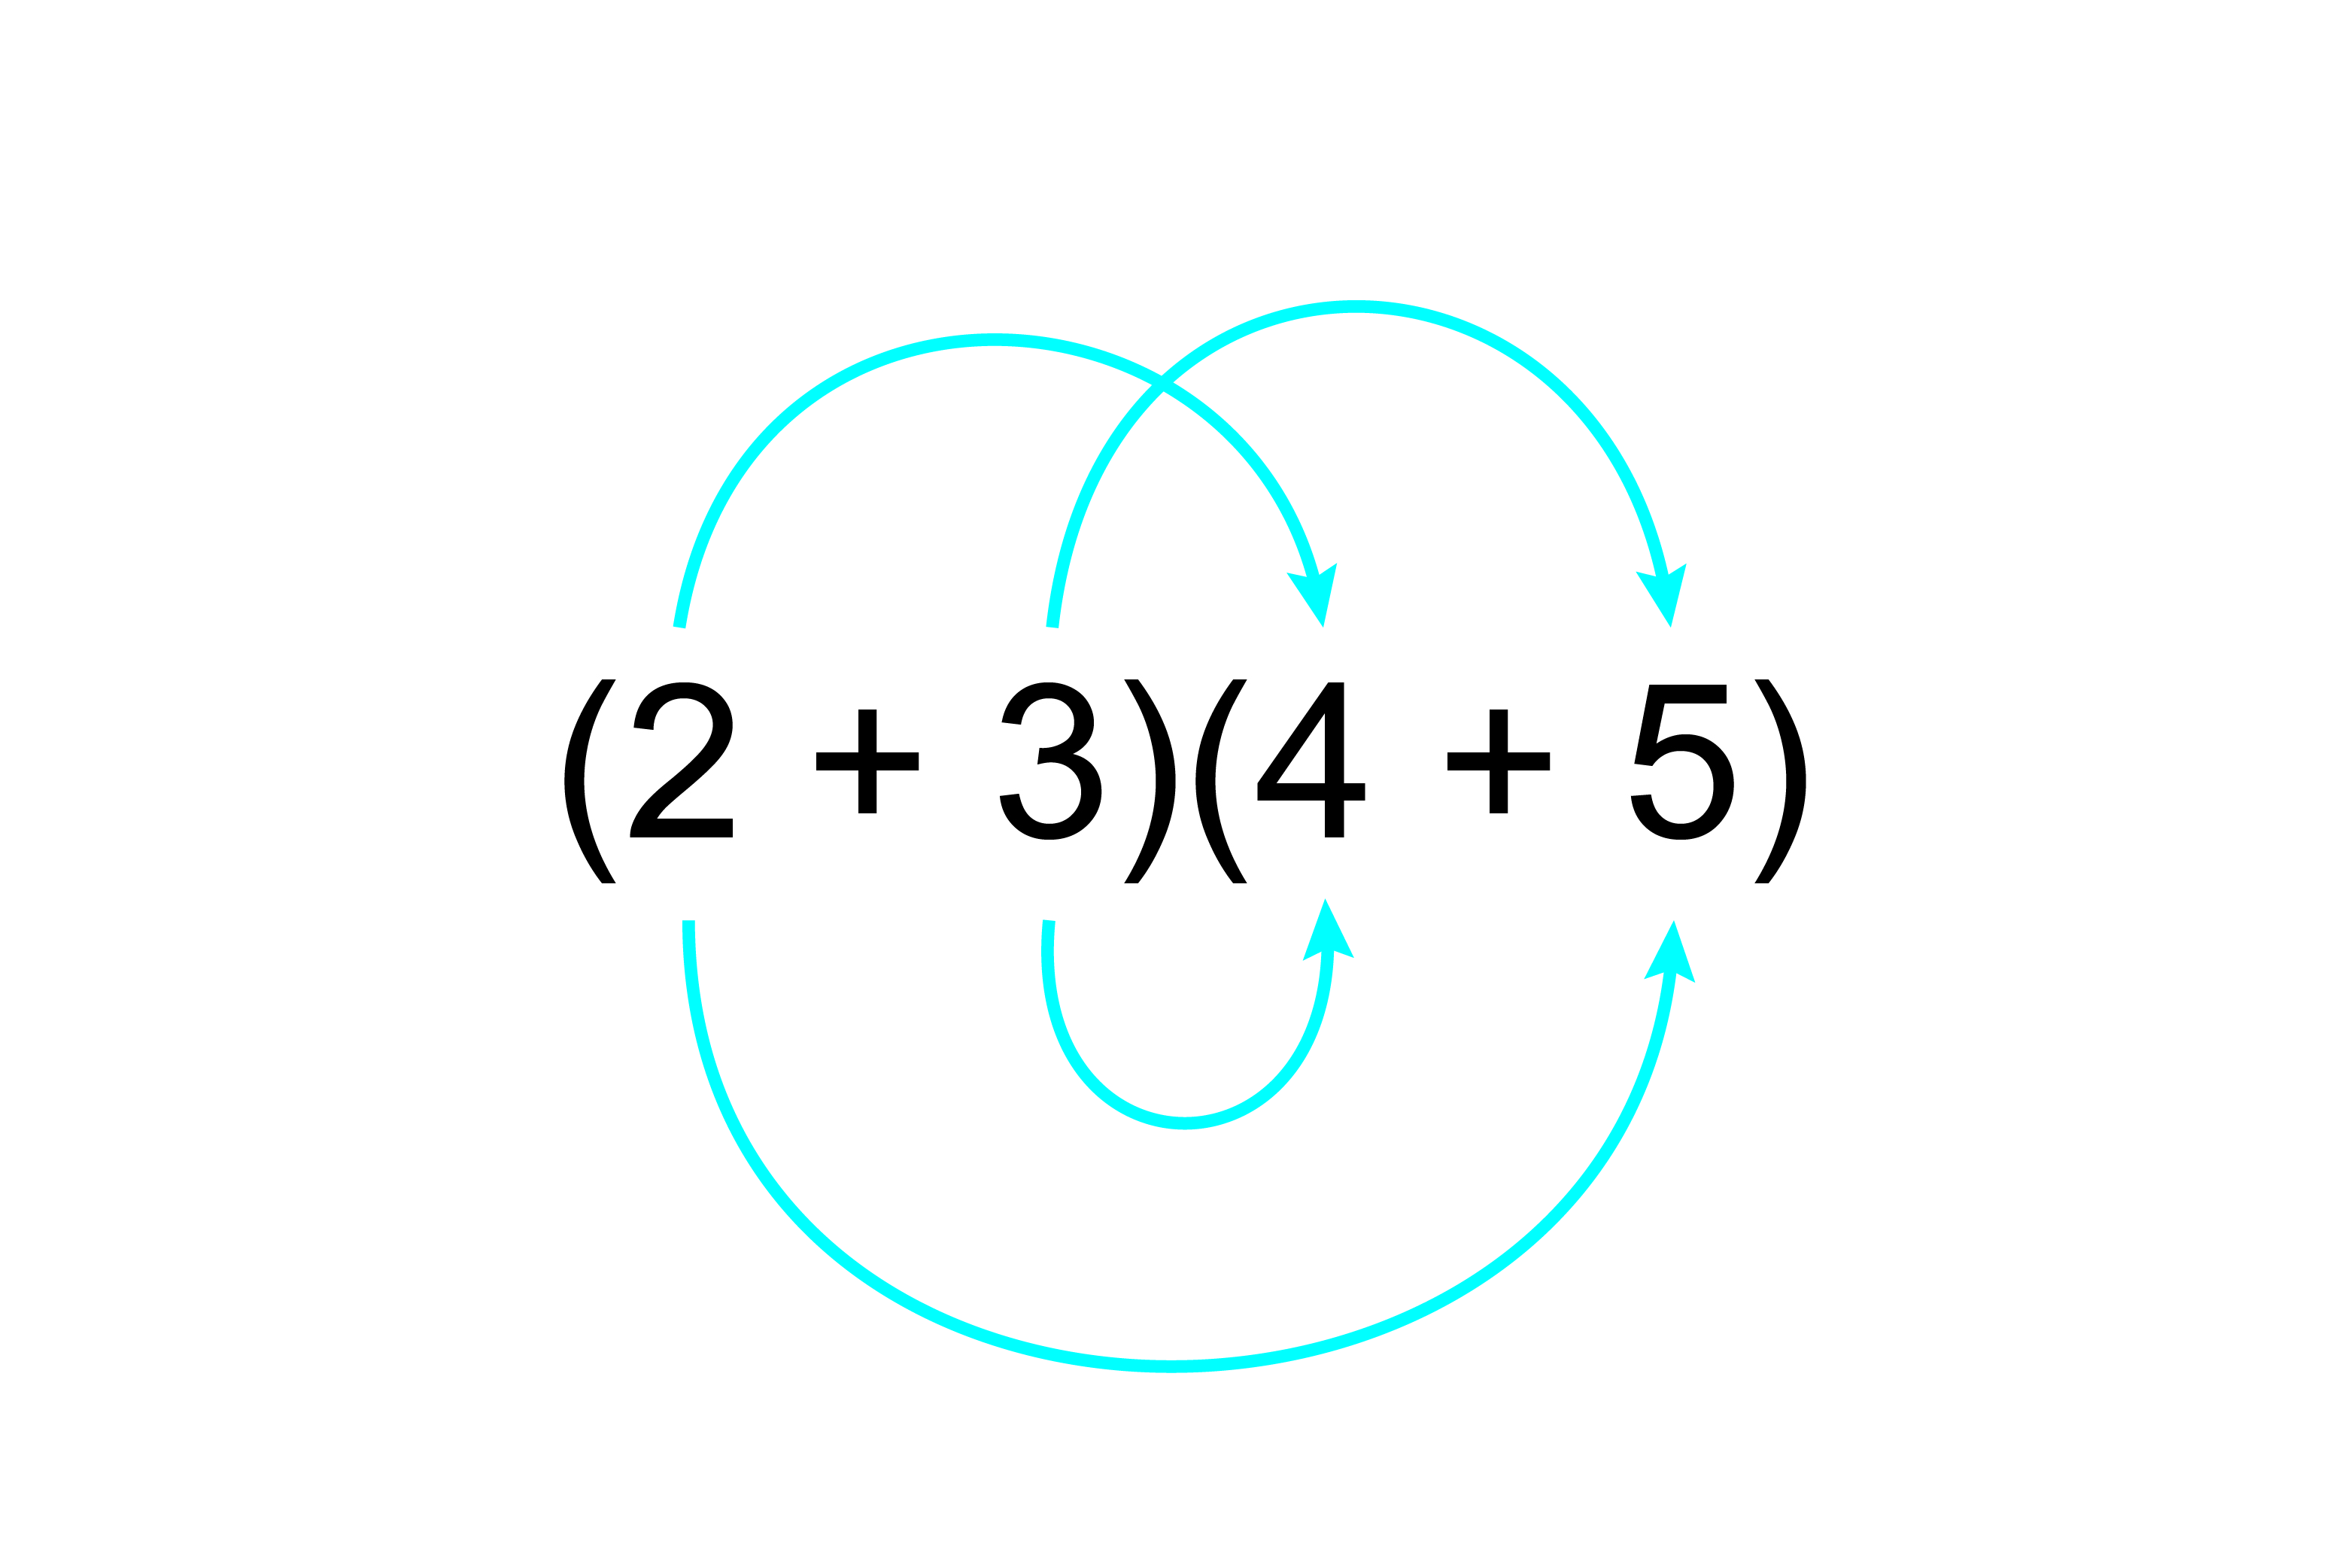 Method 2 on this simple equation look what shapes are being made to complete it, can you see it?